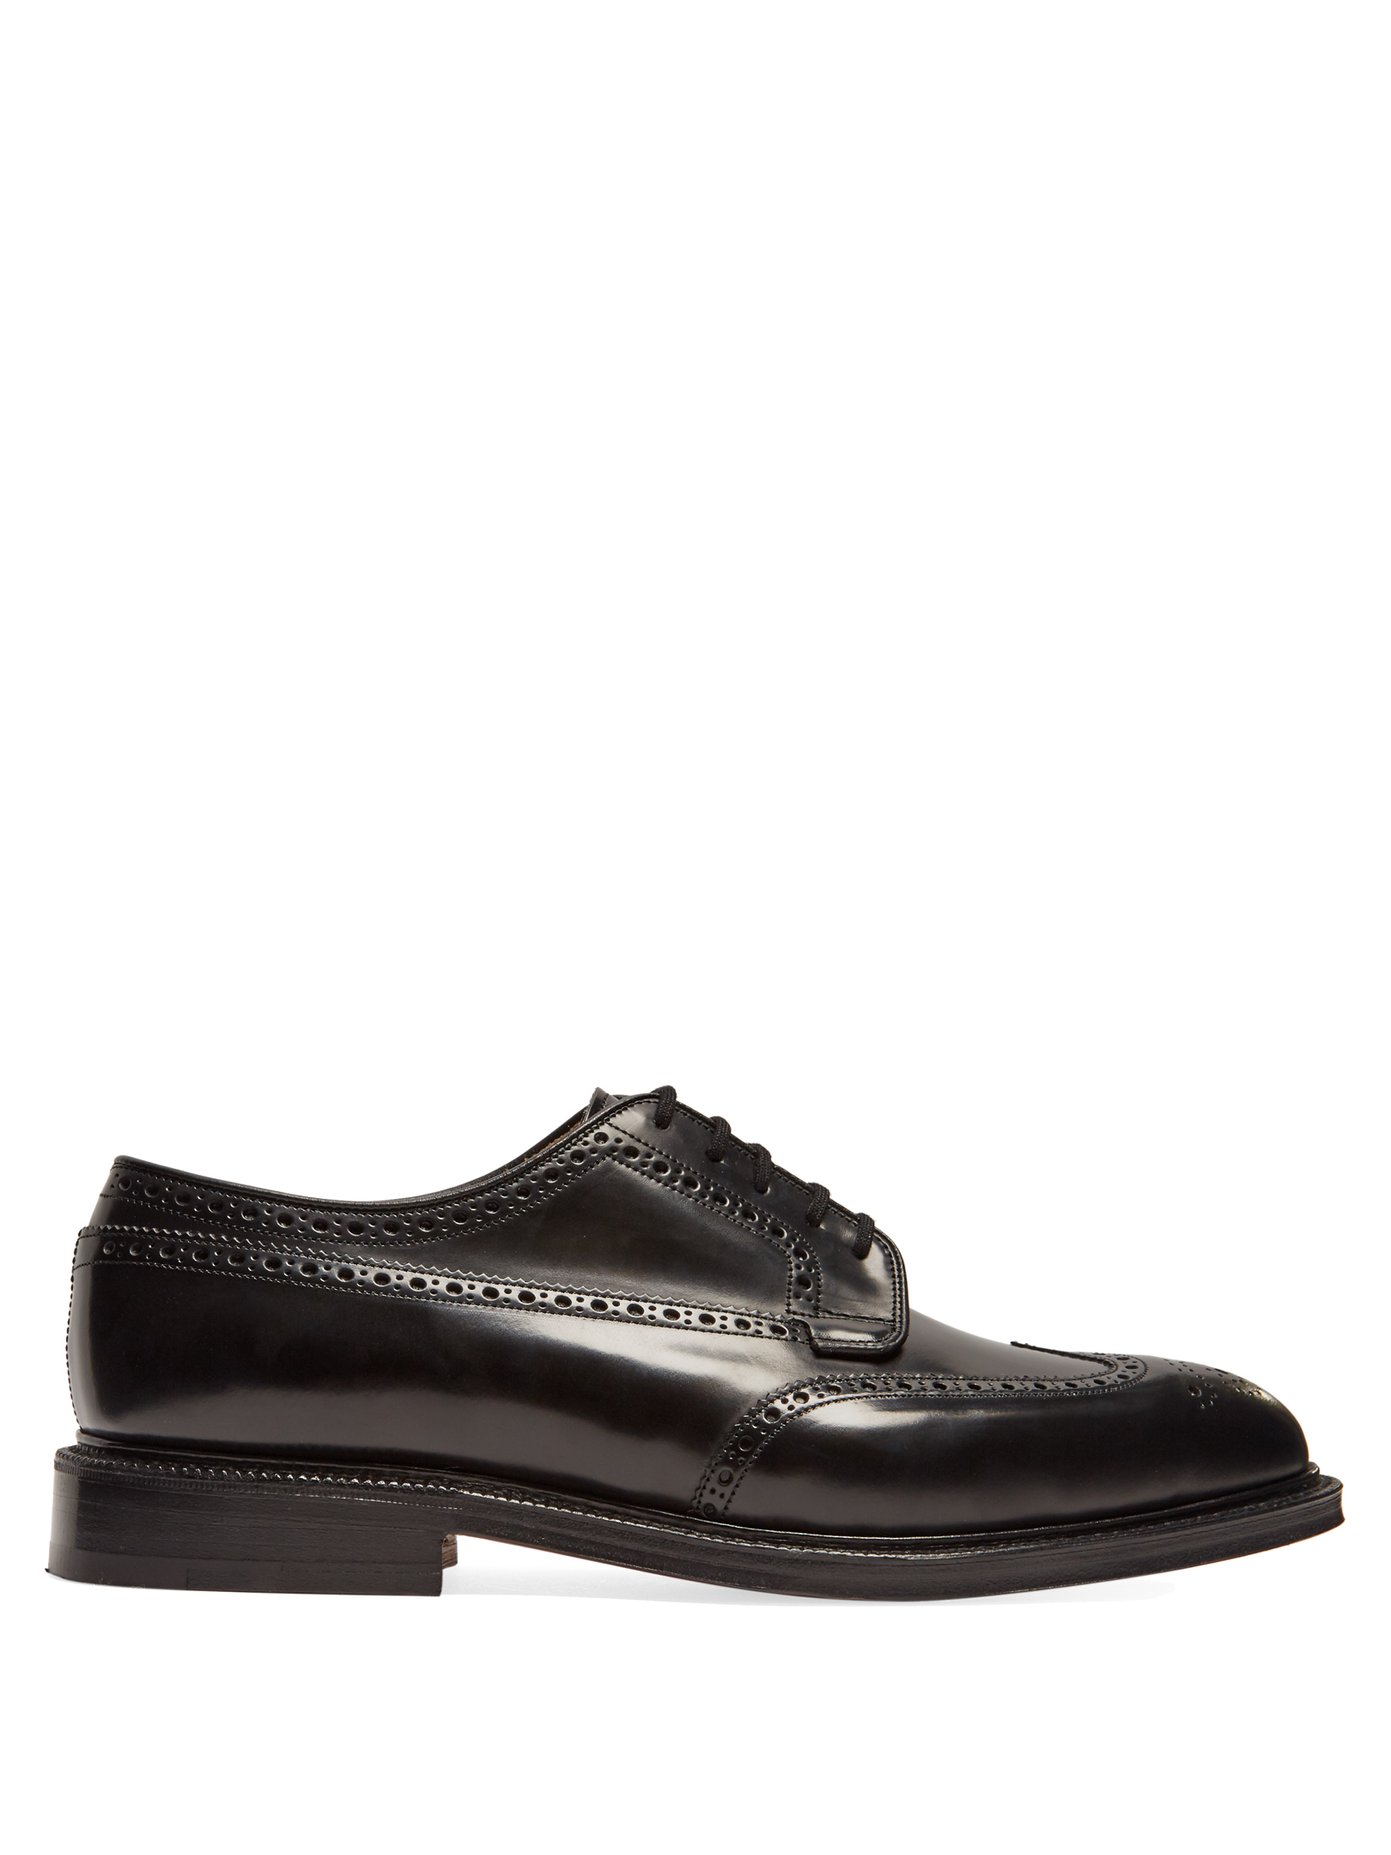 Grafton leather brogues | Church's 